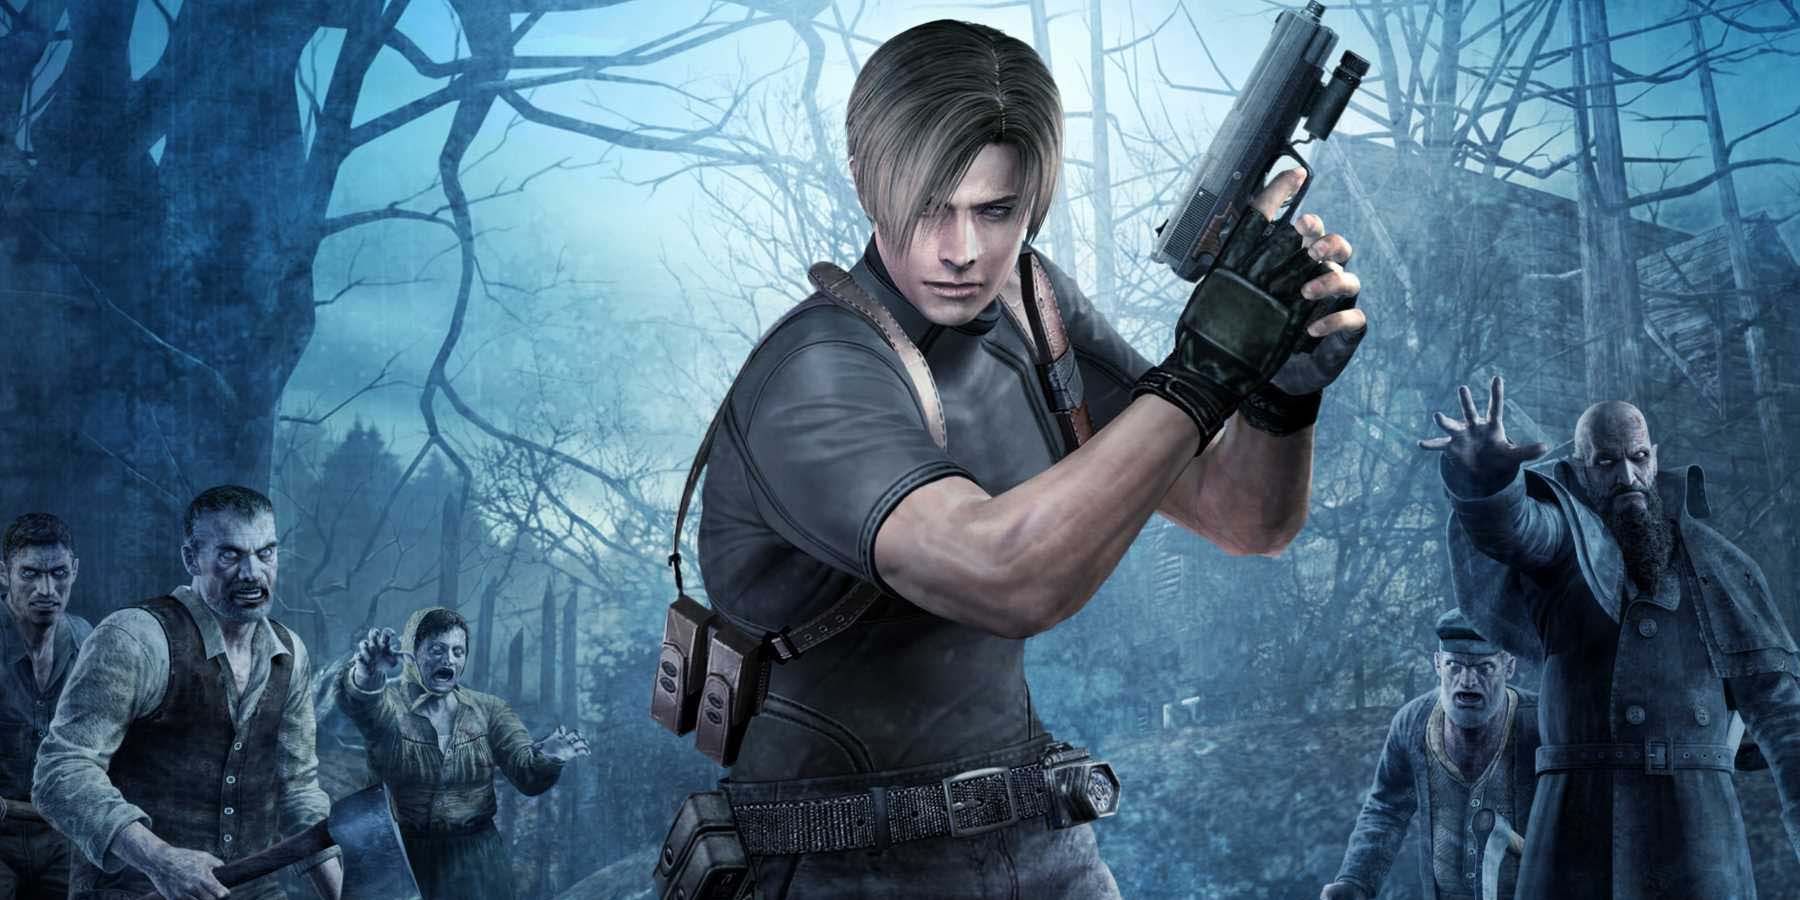 Resident Evil 4 Remake Has Been Teased or Leaked So Much That It Has to be Real